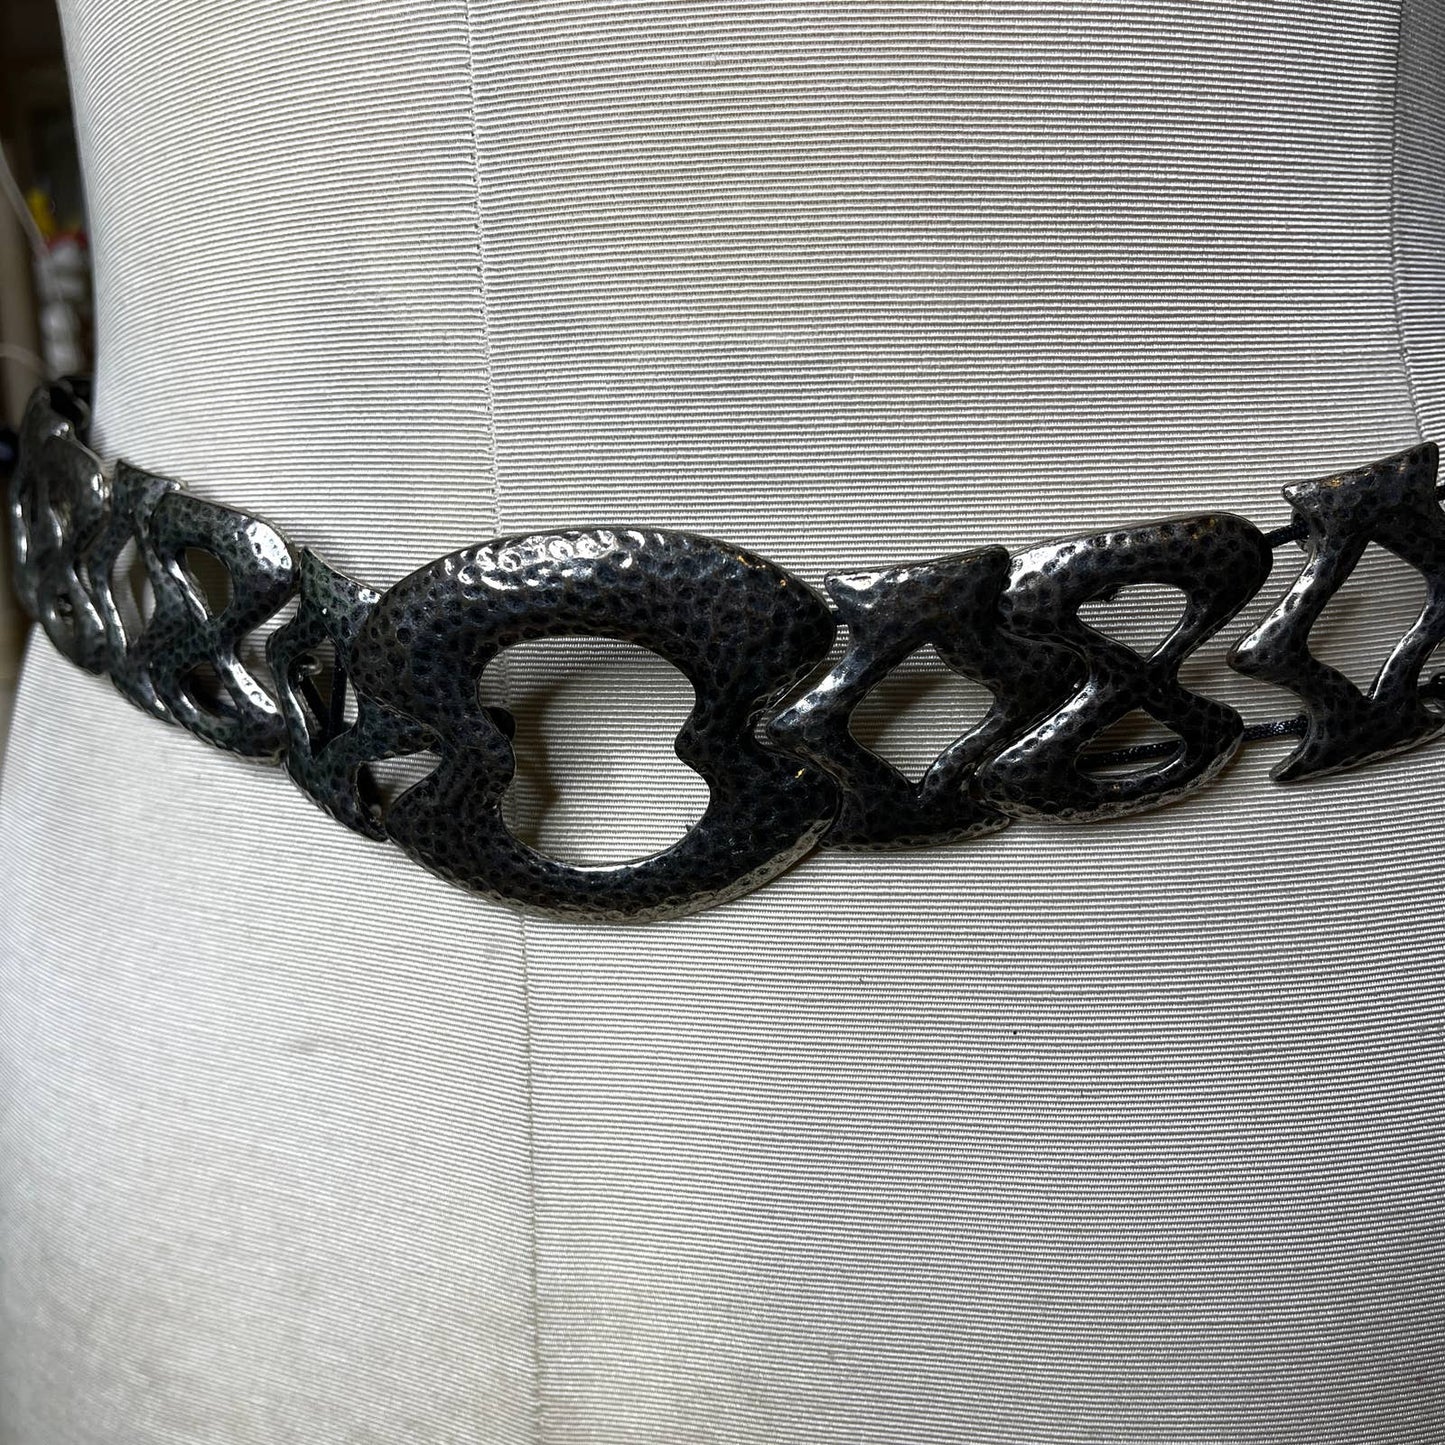 Vintage 90s Pewter Toned Hammered Metal Belt Abstract Hook Style